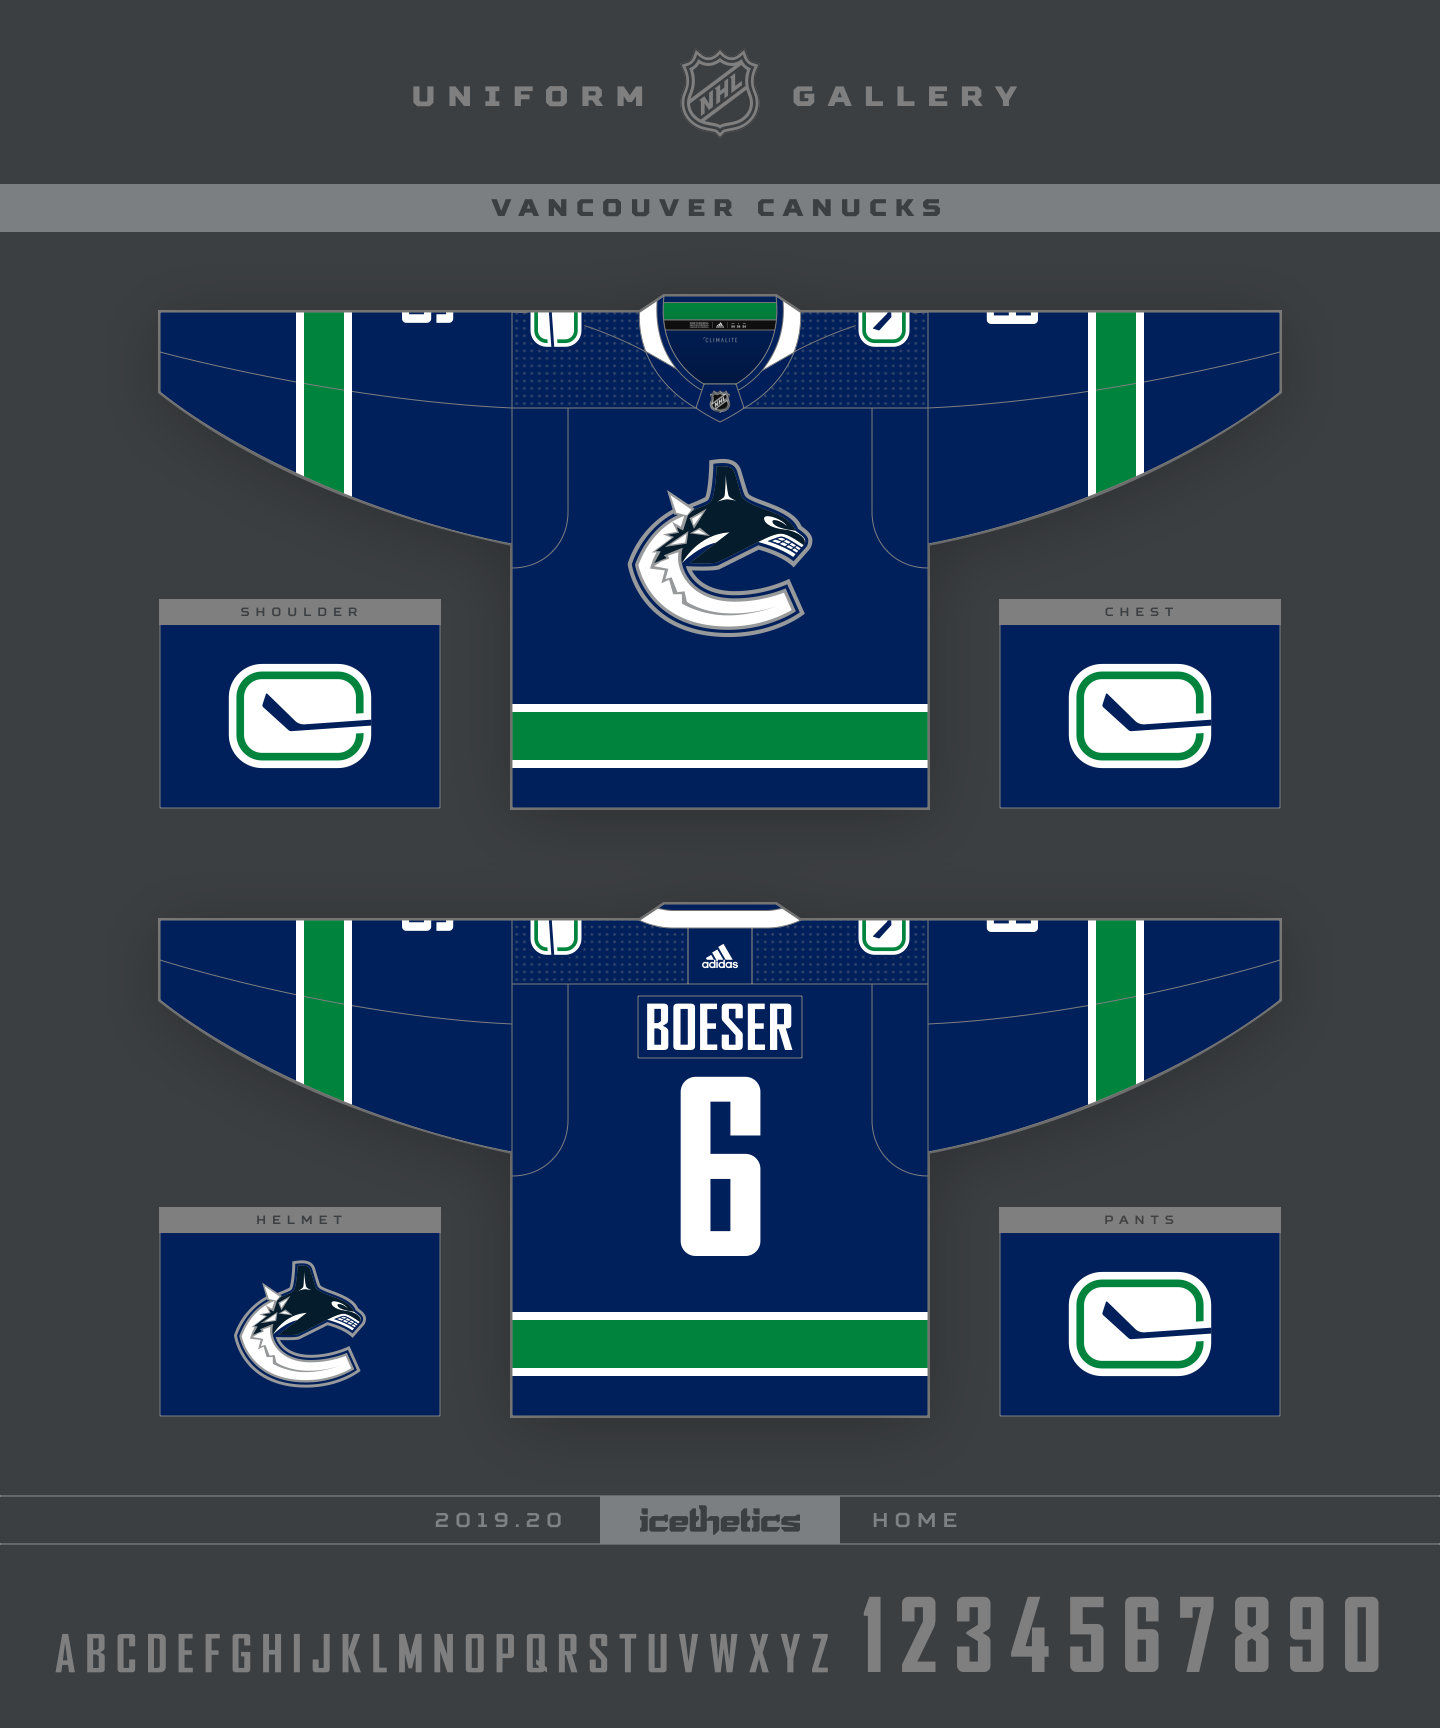  Canucks unveil quartet of new sweaters for 50th anniversary